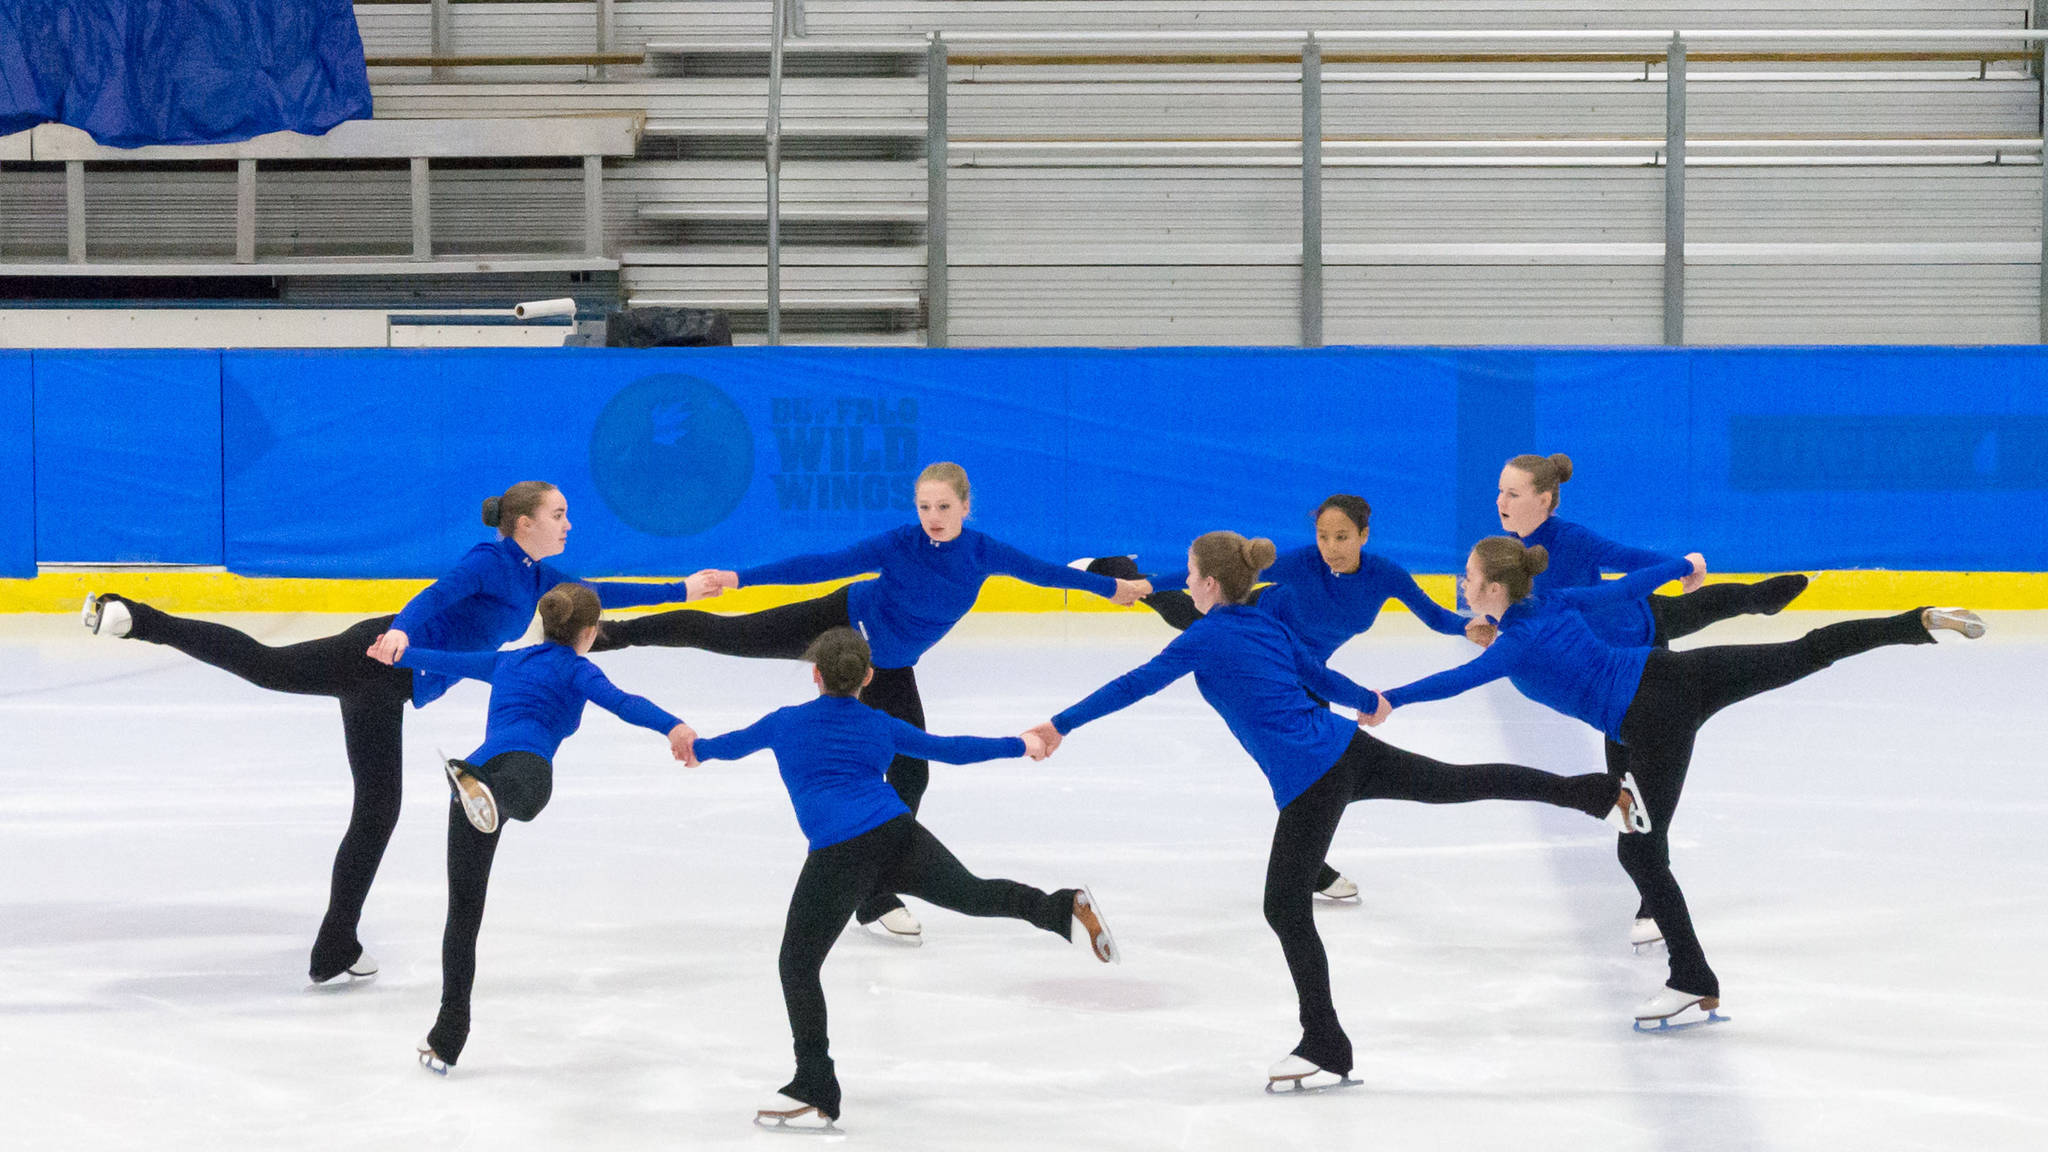 The Juneau Skating Club’s Team Forget-Me-Not performs at the 2017 Foot of the Lake Synchronized Skating Classic in Fond du Lac, Wisconsin last January. The synchronized skating team is back in Wisconsin this weekend for the synchronized skating competition and will compete with about a dozen teams in the open juvenile division. (Courtesy Photo | April Hoy)